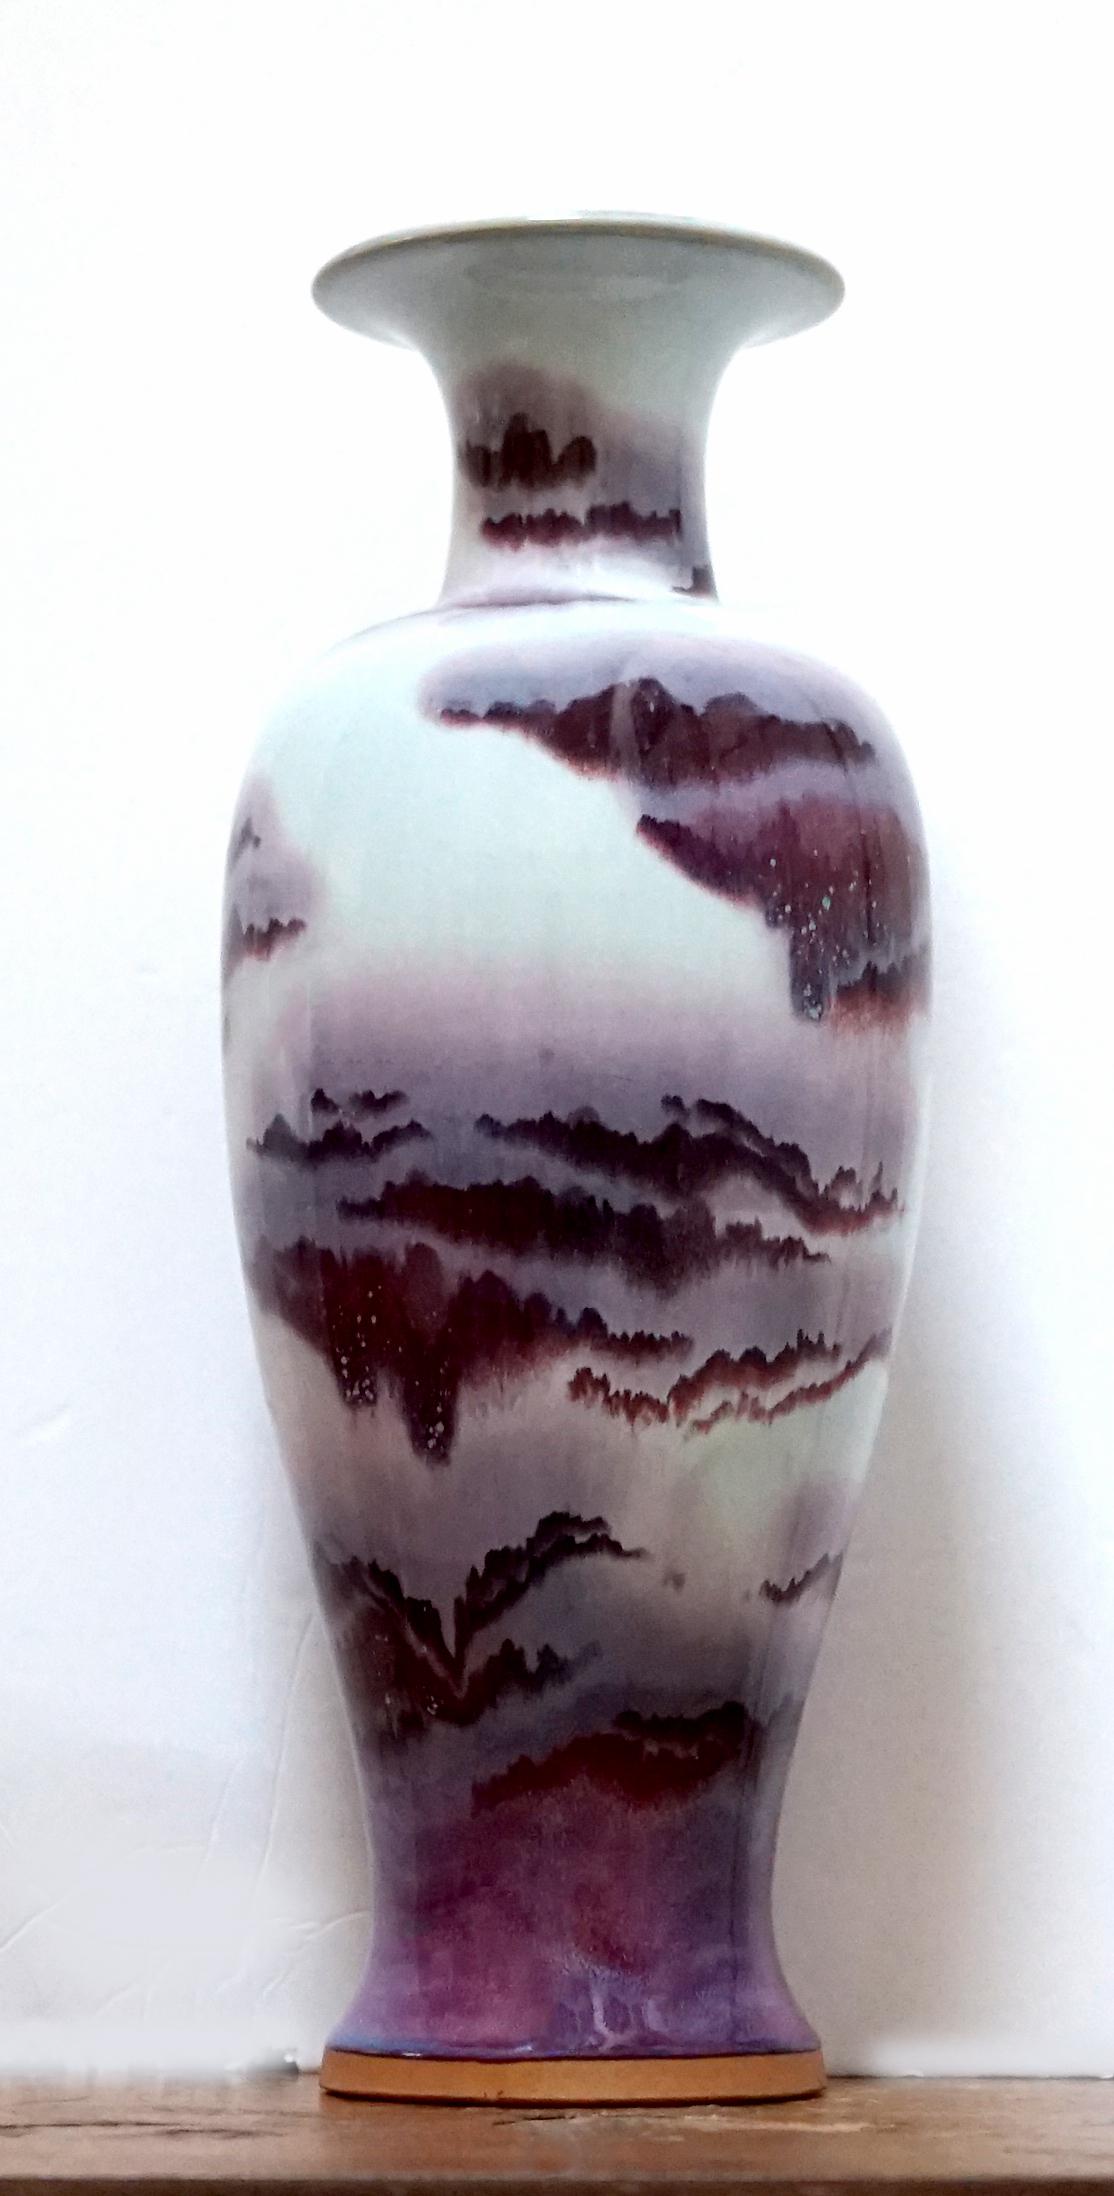 The color and formation on this vase is stunning. A 19th century Chinese Sang de Boeuf blue and red toned vase. The Sang de boeuf vase features a rich, deep red glaze that ranges from a dark, almost purplish hue to a lighter, translucent red and